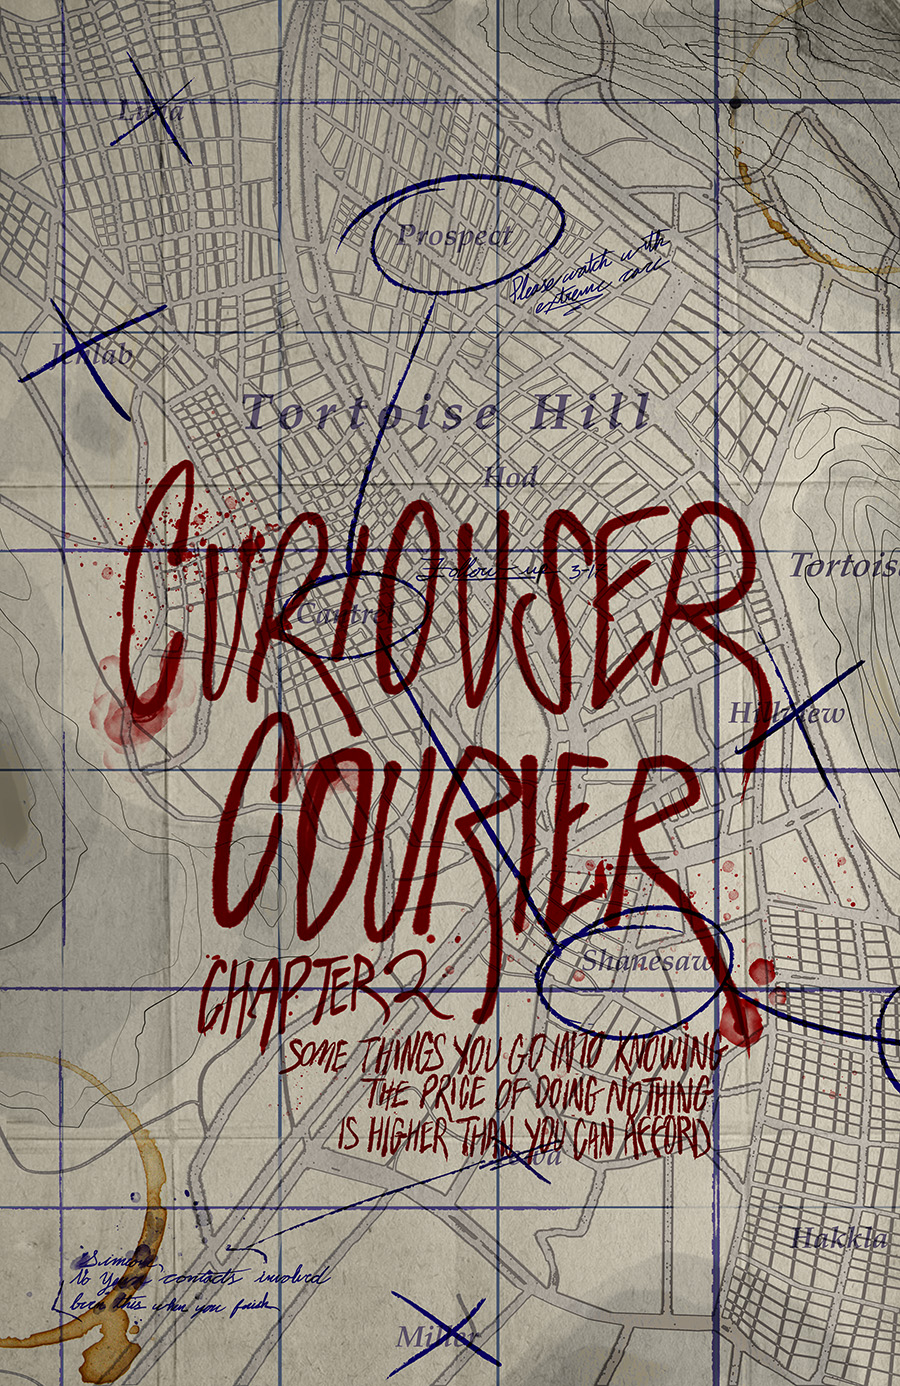 Curiouser Courier